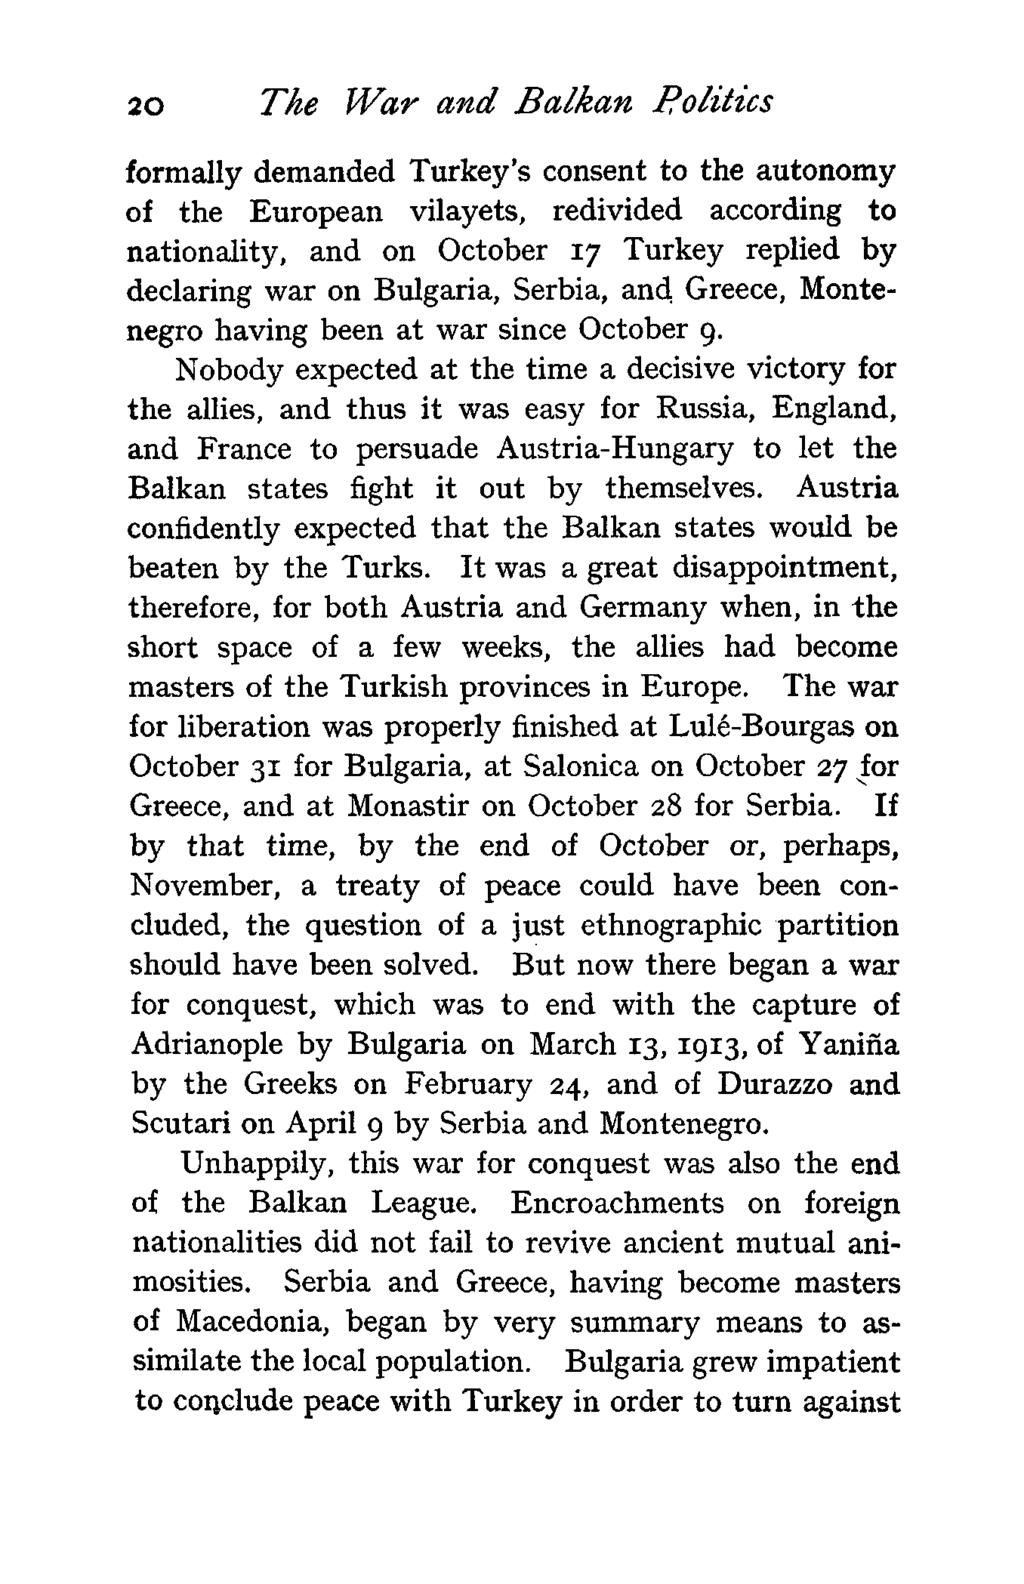 2O The War and Balkan Politics formally demanded Turkey's consent to the autonomy of the European vilayets, redivided according to nationality, and on October 17 Turkey replied by declaring war on